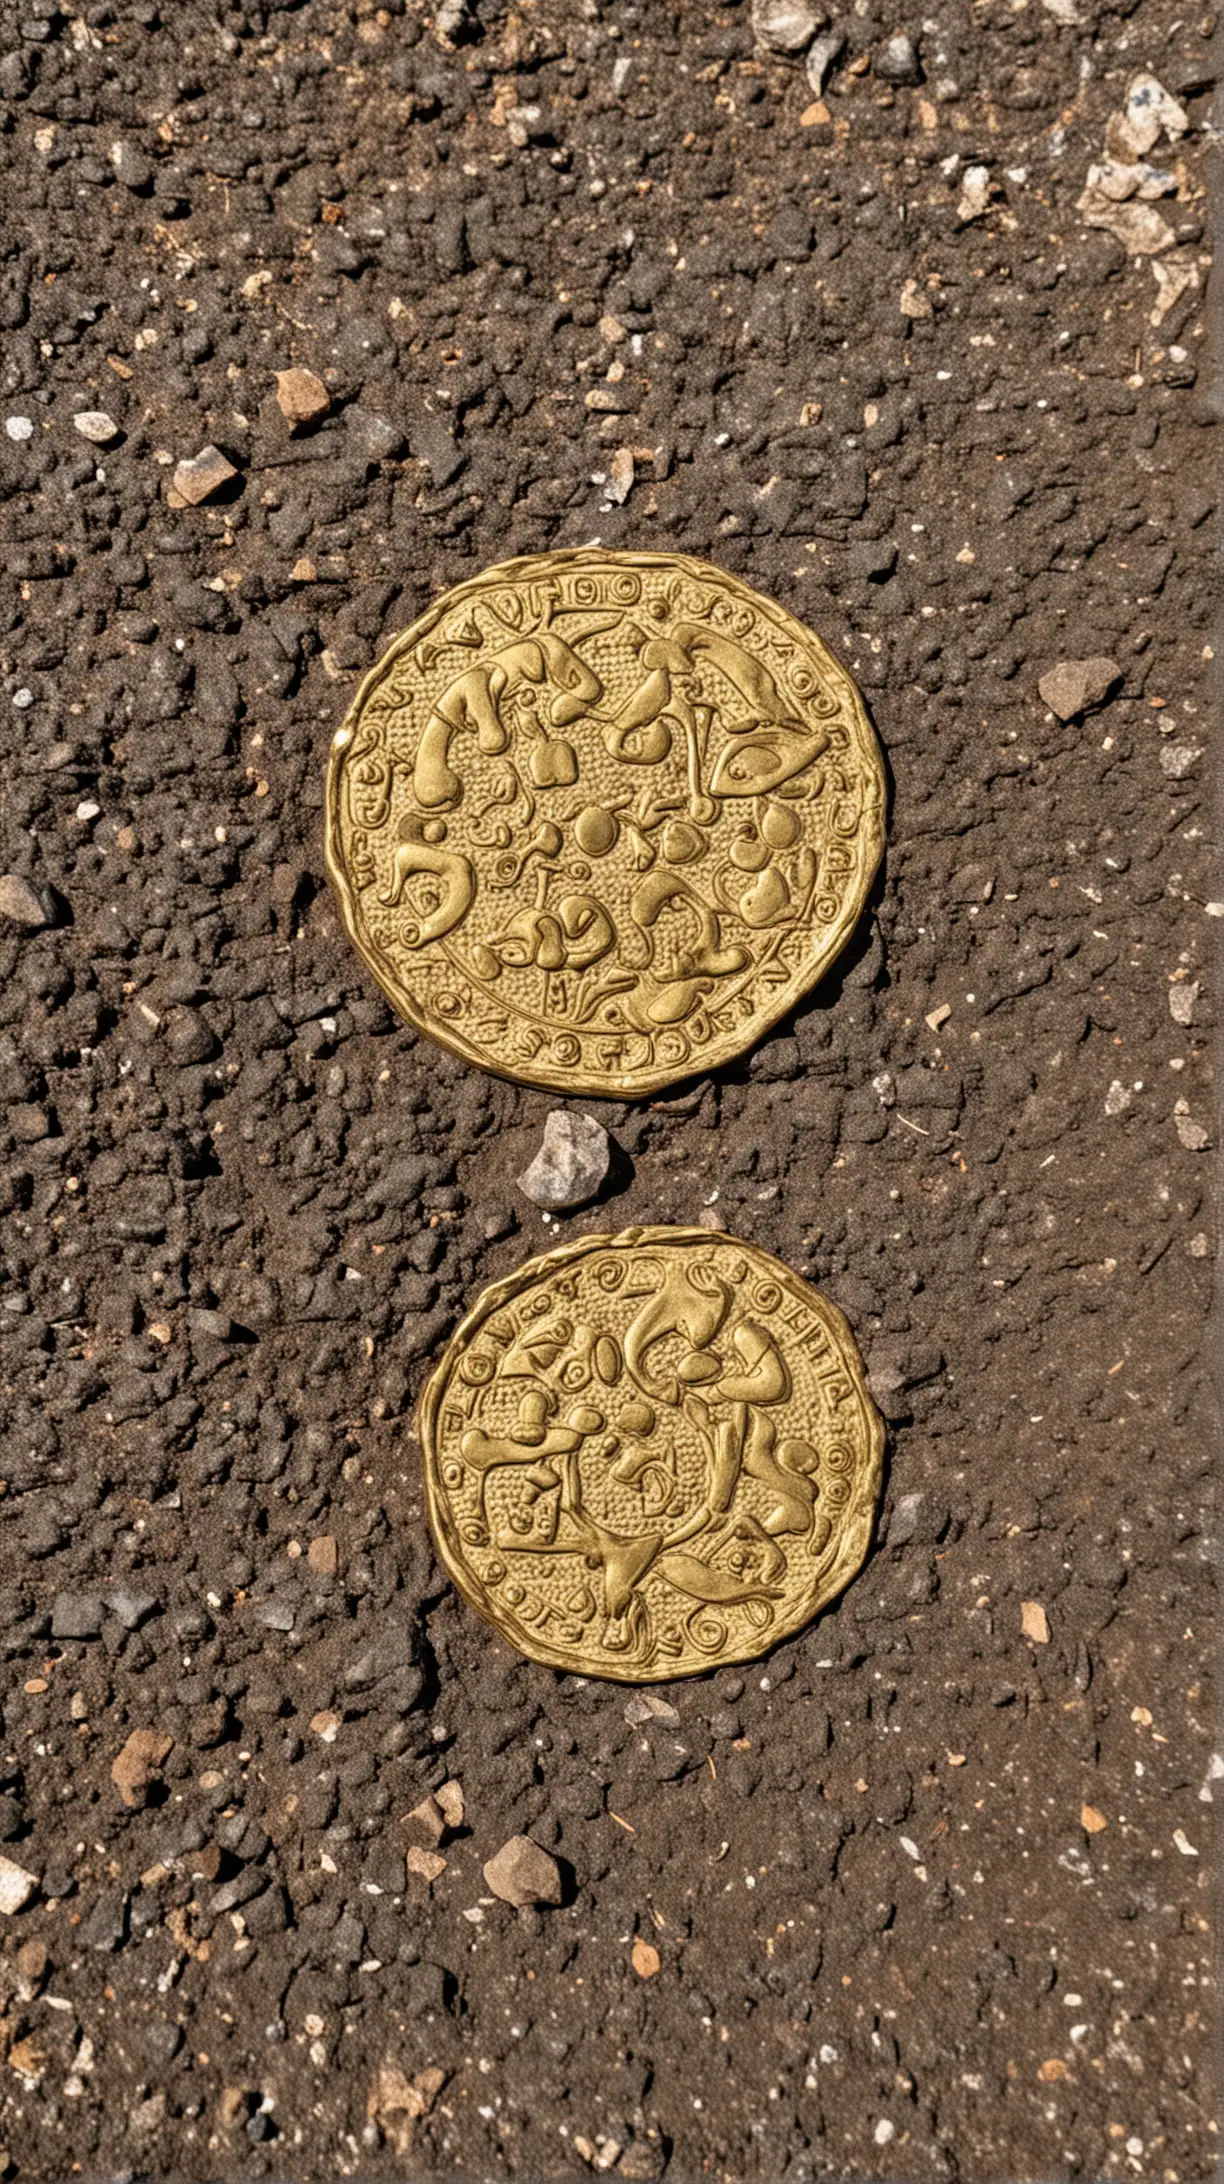 near the old swing set—a shiny gold coin covered in strange symbols.